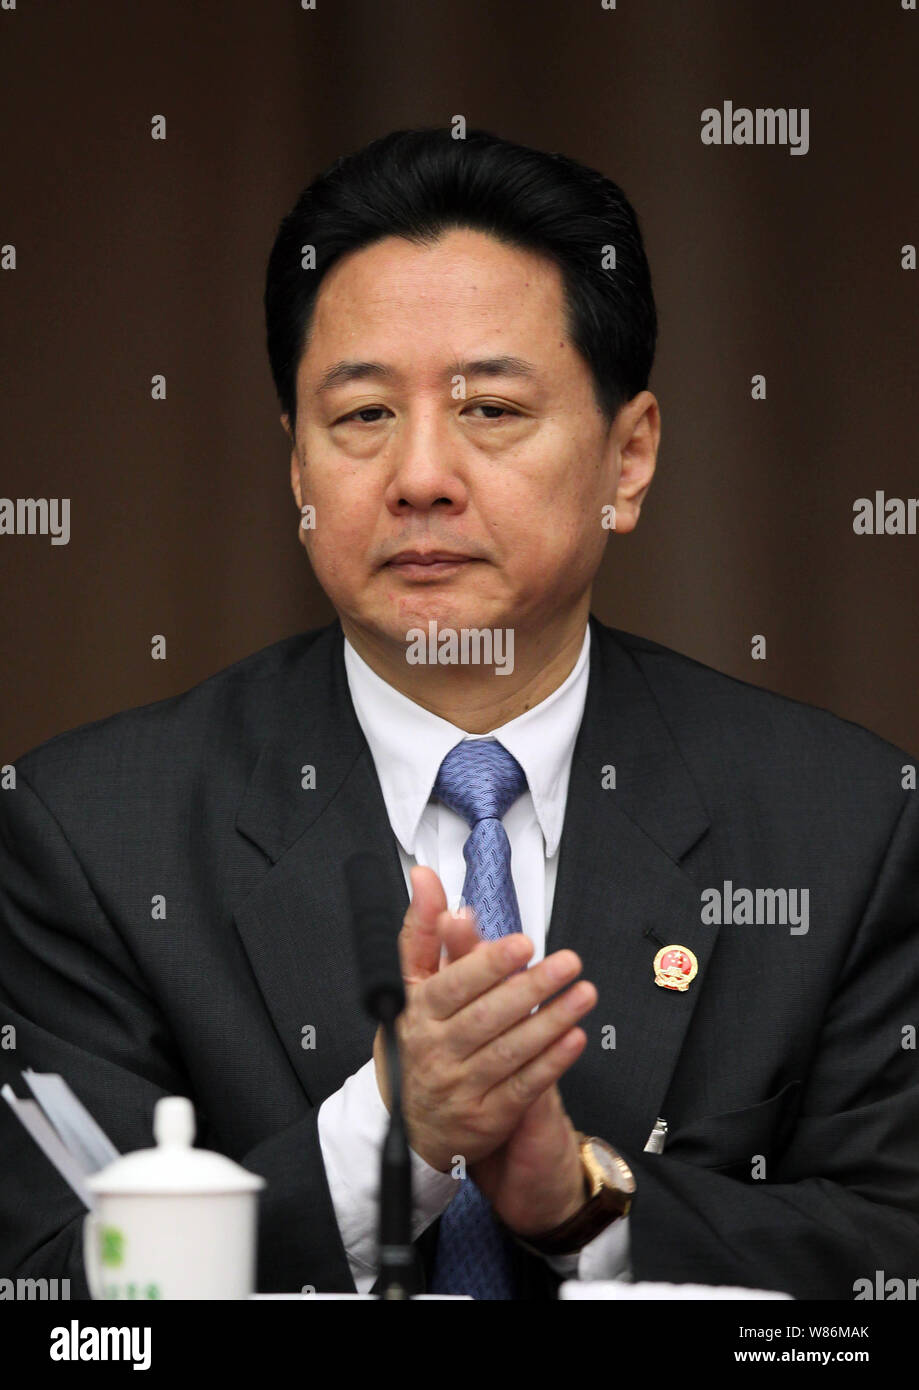 --FILE--Li Xiaopeng, governor of Shanxi province and the son of former Chinese Premier Li Peng, attends a media event during the First Session of the Stock Photo